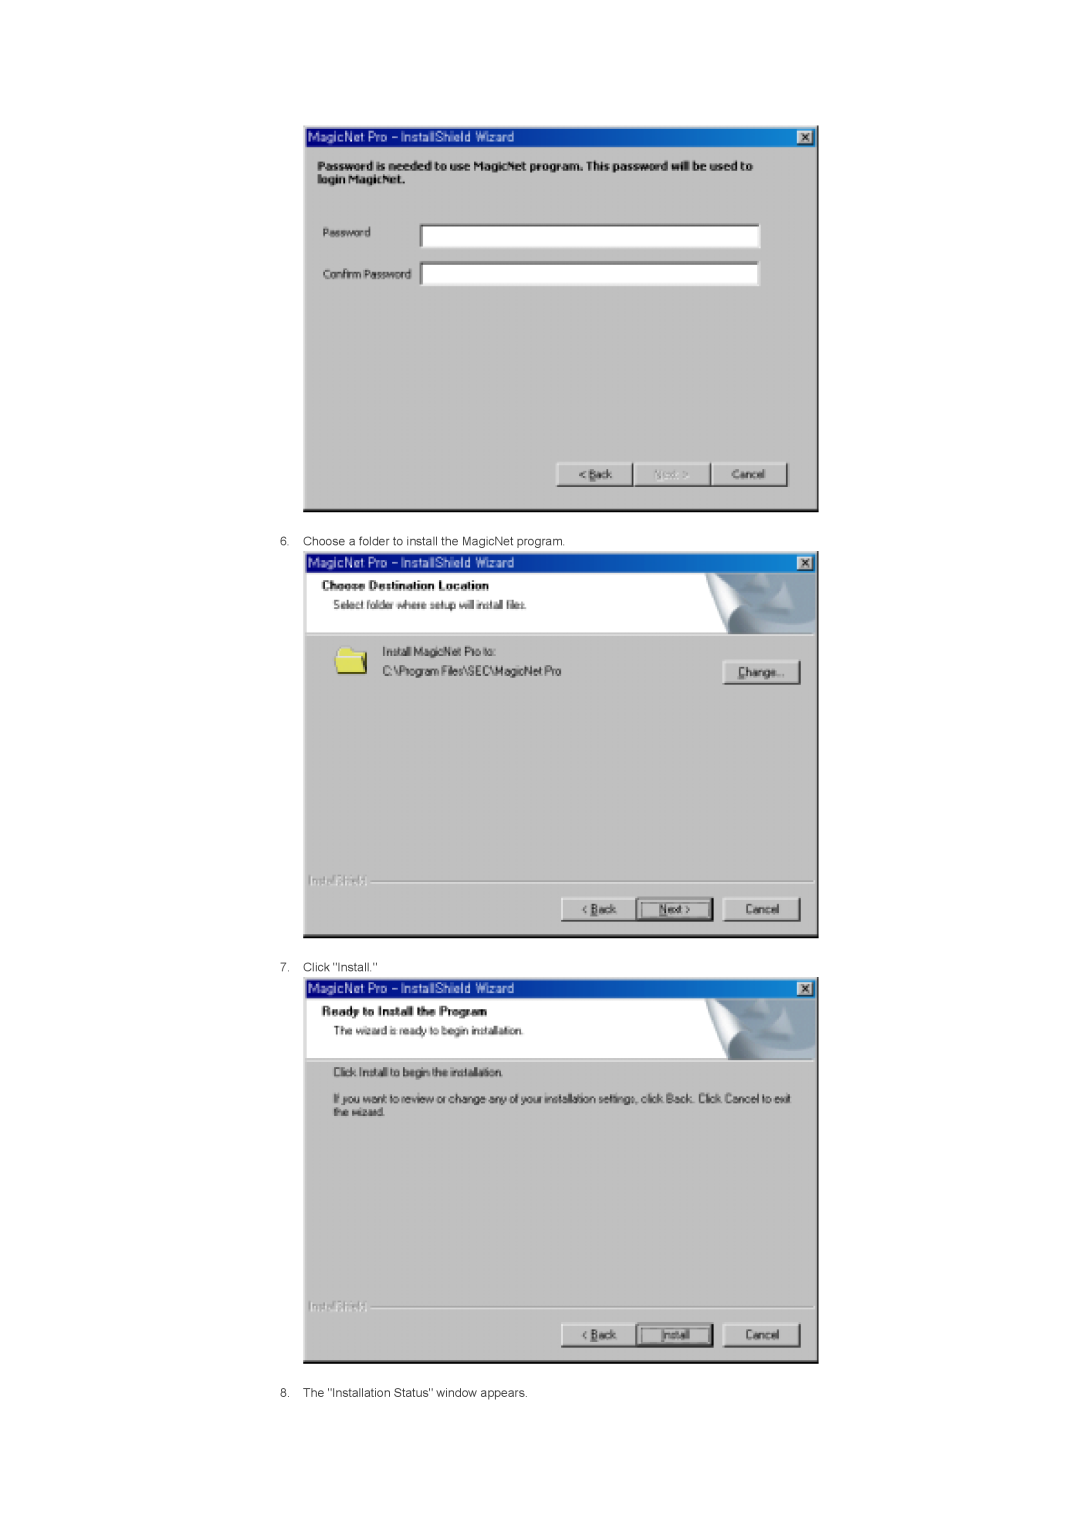 Samsung 820DXN Choose a folder to install the MagicNet program 7. Click Install, The Installation Status window appears 